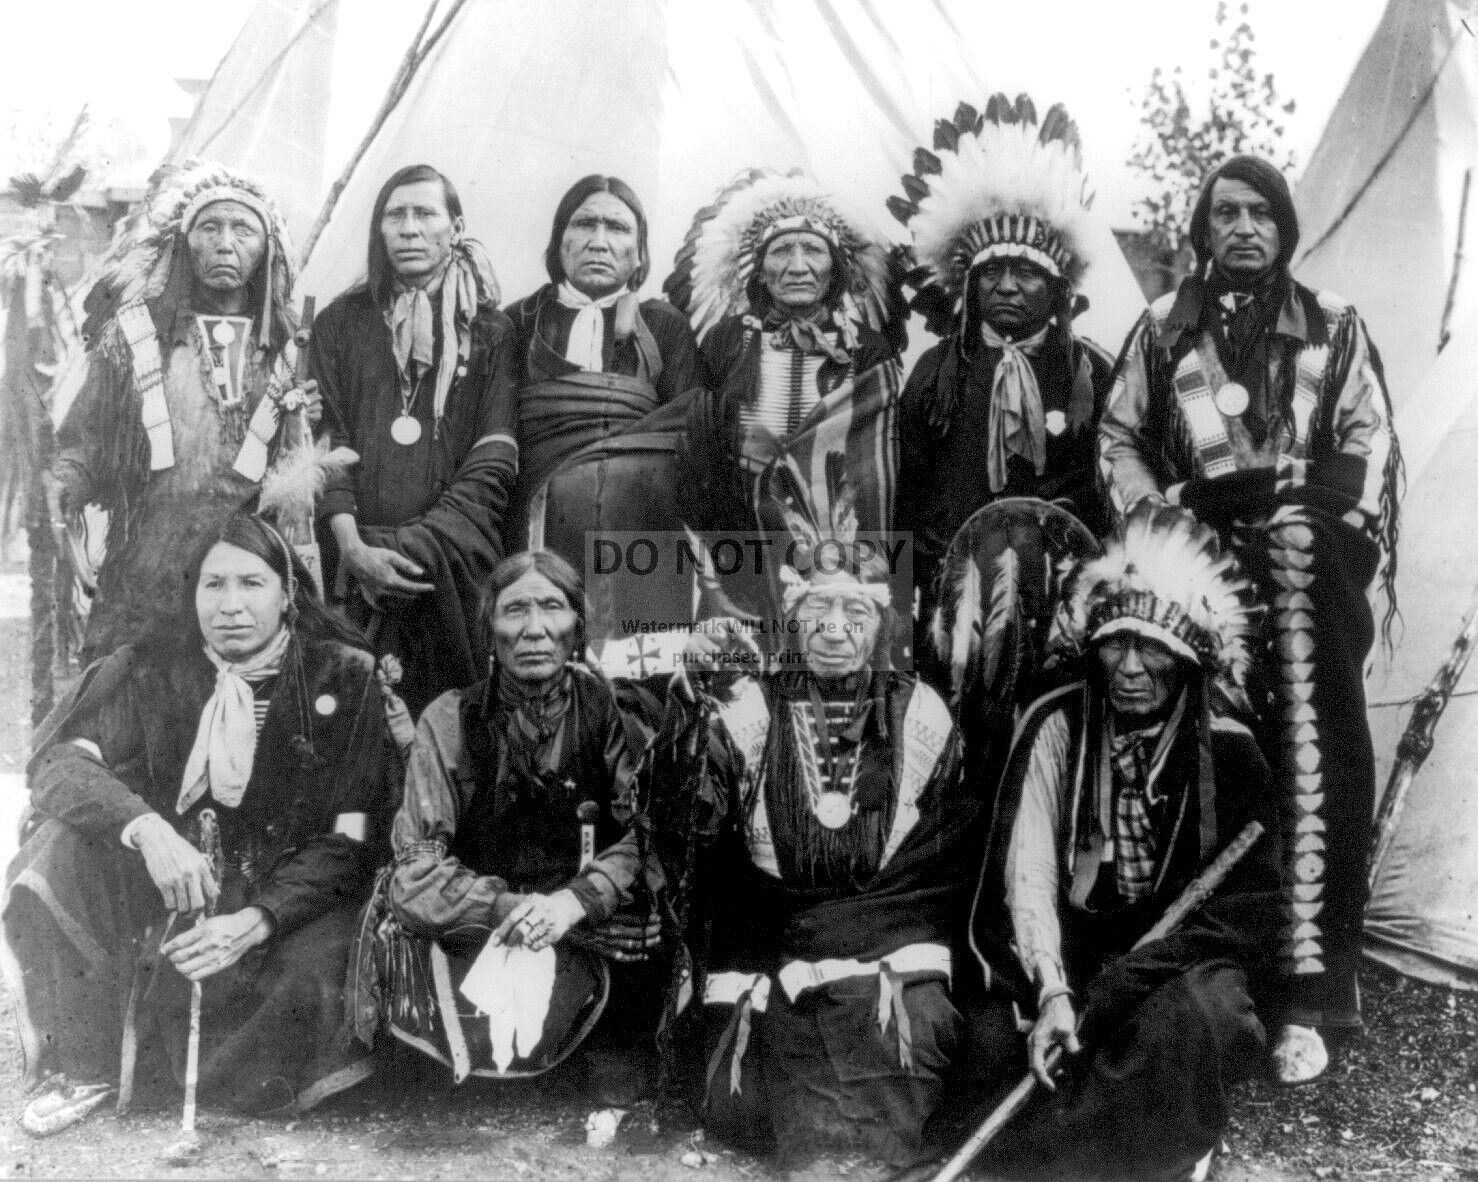 GROUP OF APACHE & SIOUX INDIANS @ 1904 ST. LOUIS EXPOSITION  8X10 PHOTO (FB-058)